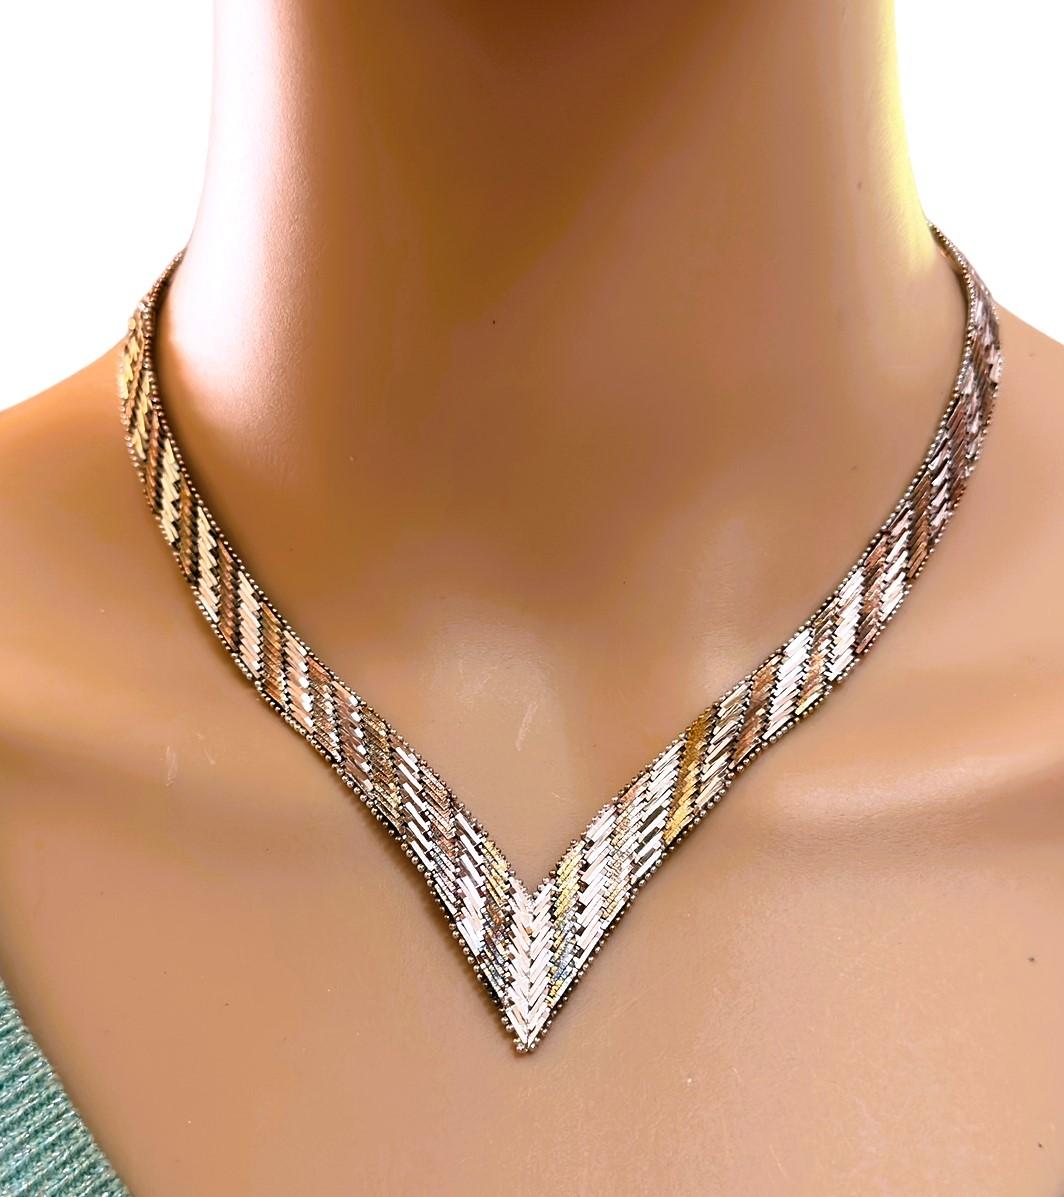 Vintage Italy 925 Sterling Silver Chevron Herringbone Two-Color V Shape Necklace with a Box Clasp Closure.  It's a nice heavy flexible necklace.  The Necklace is 18” long and weighs 38.73 Grams.  It drapes beautifully around the neck and forms a